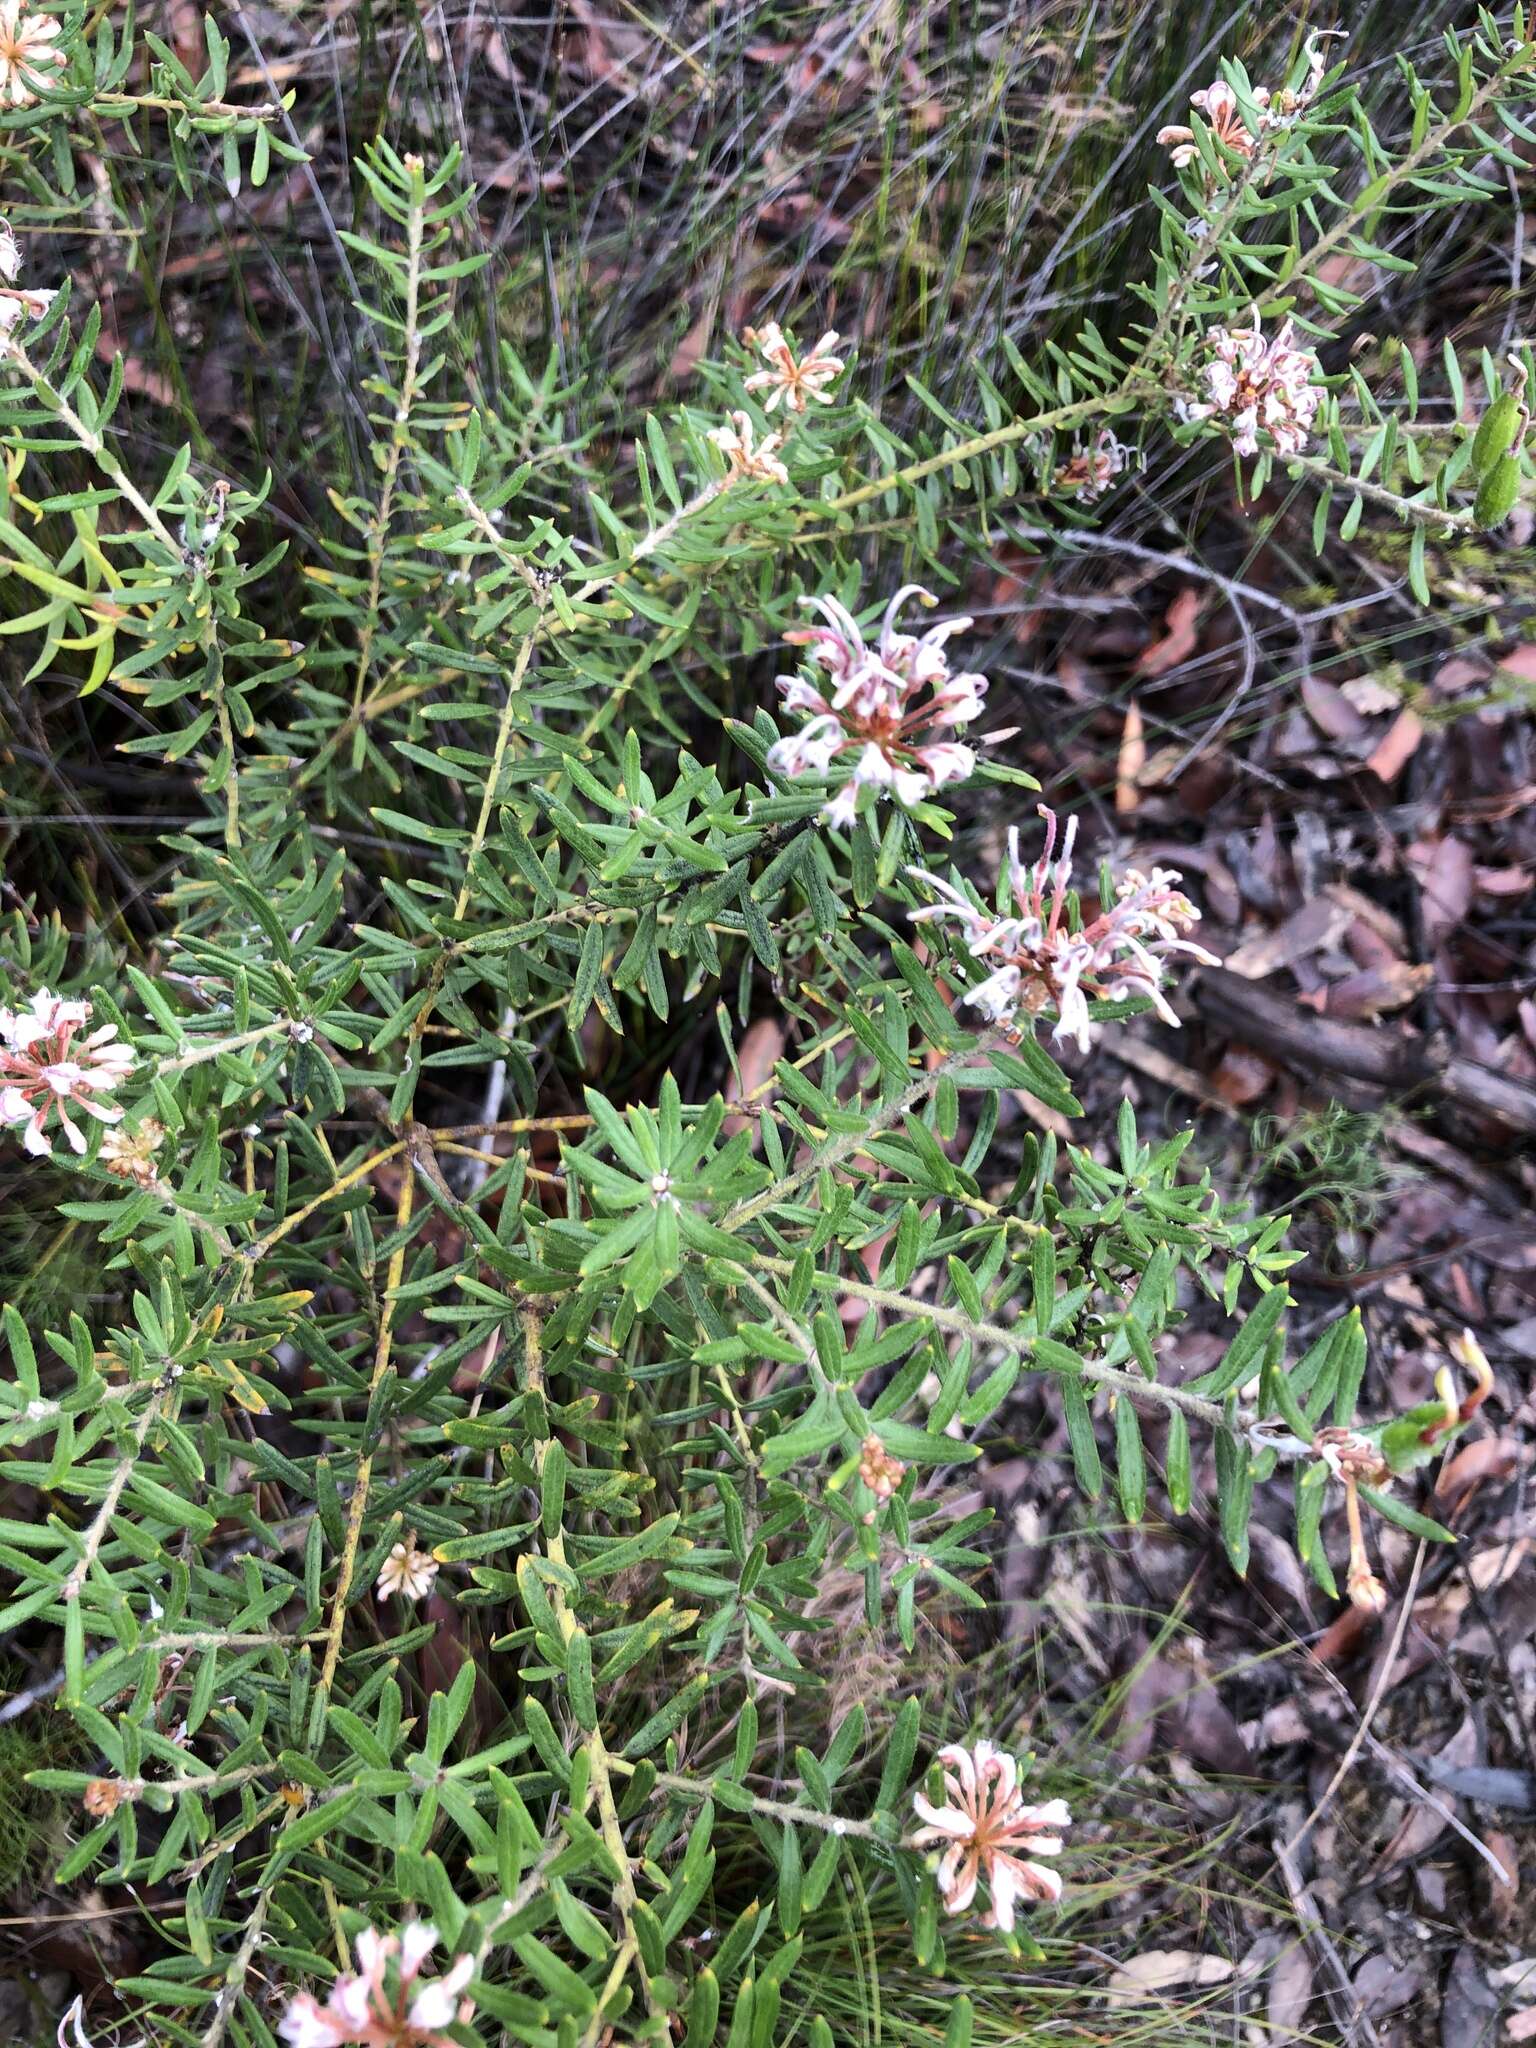 Image of Grevillea phylicoides R. Br.